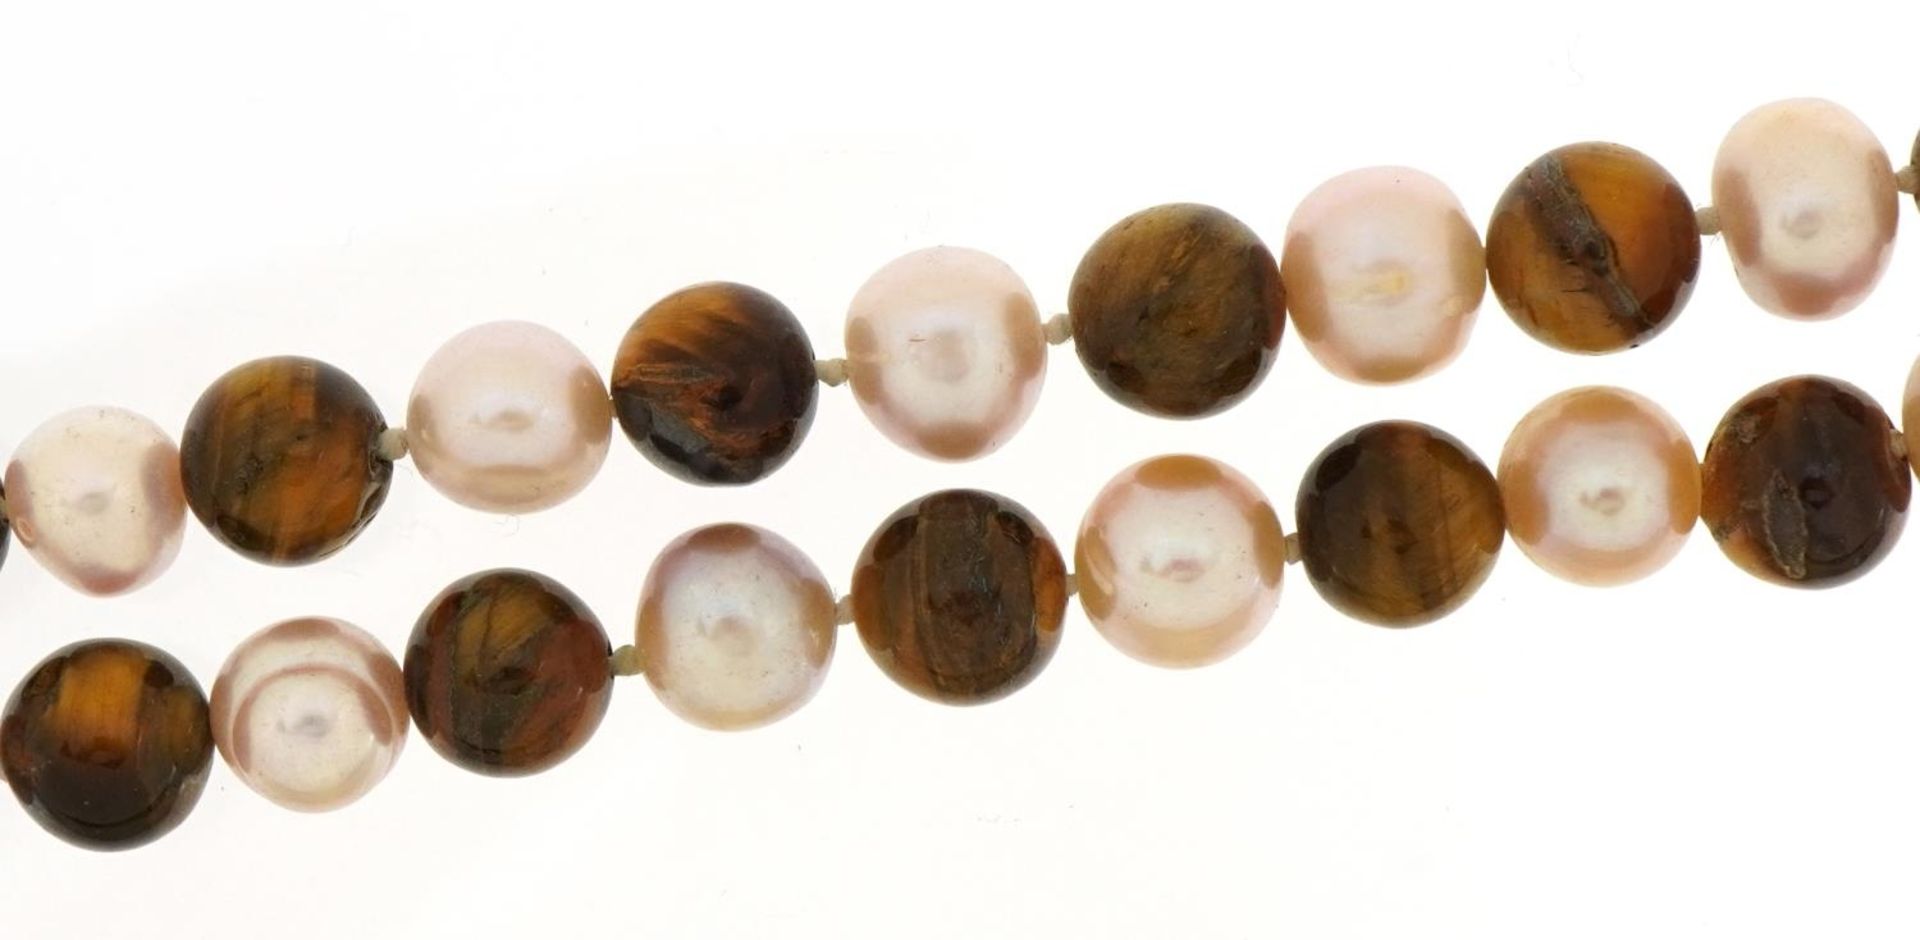 Tiger's eye and pearl bead necklace, 120cm in length, 114.1g : For further information on this lot